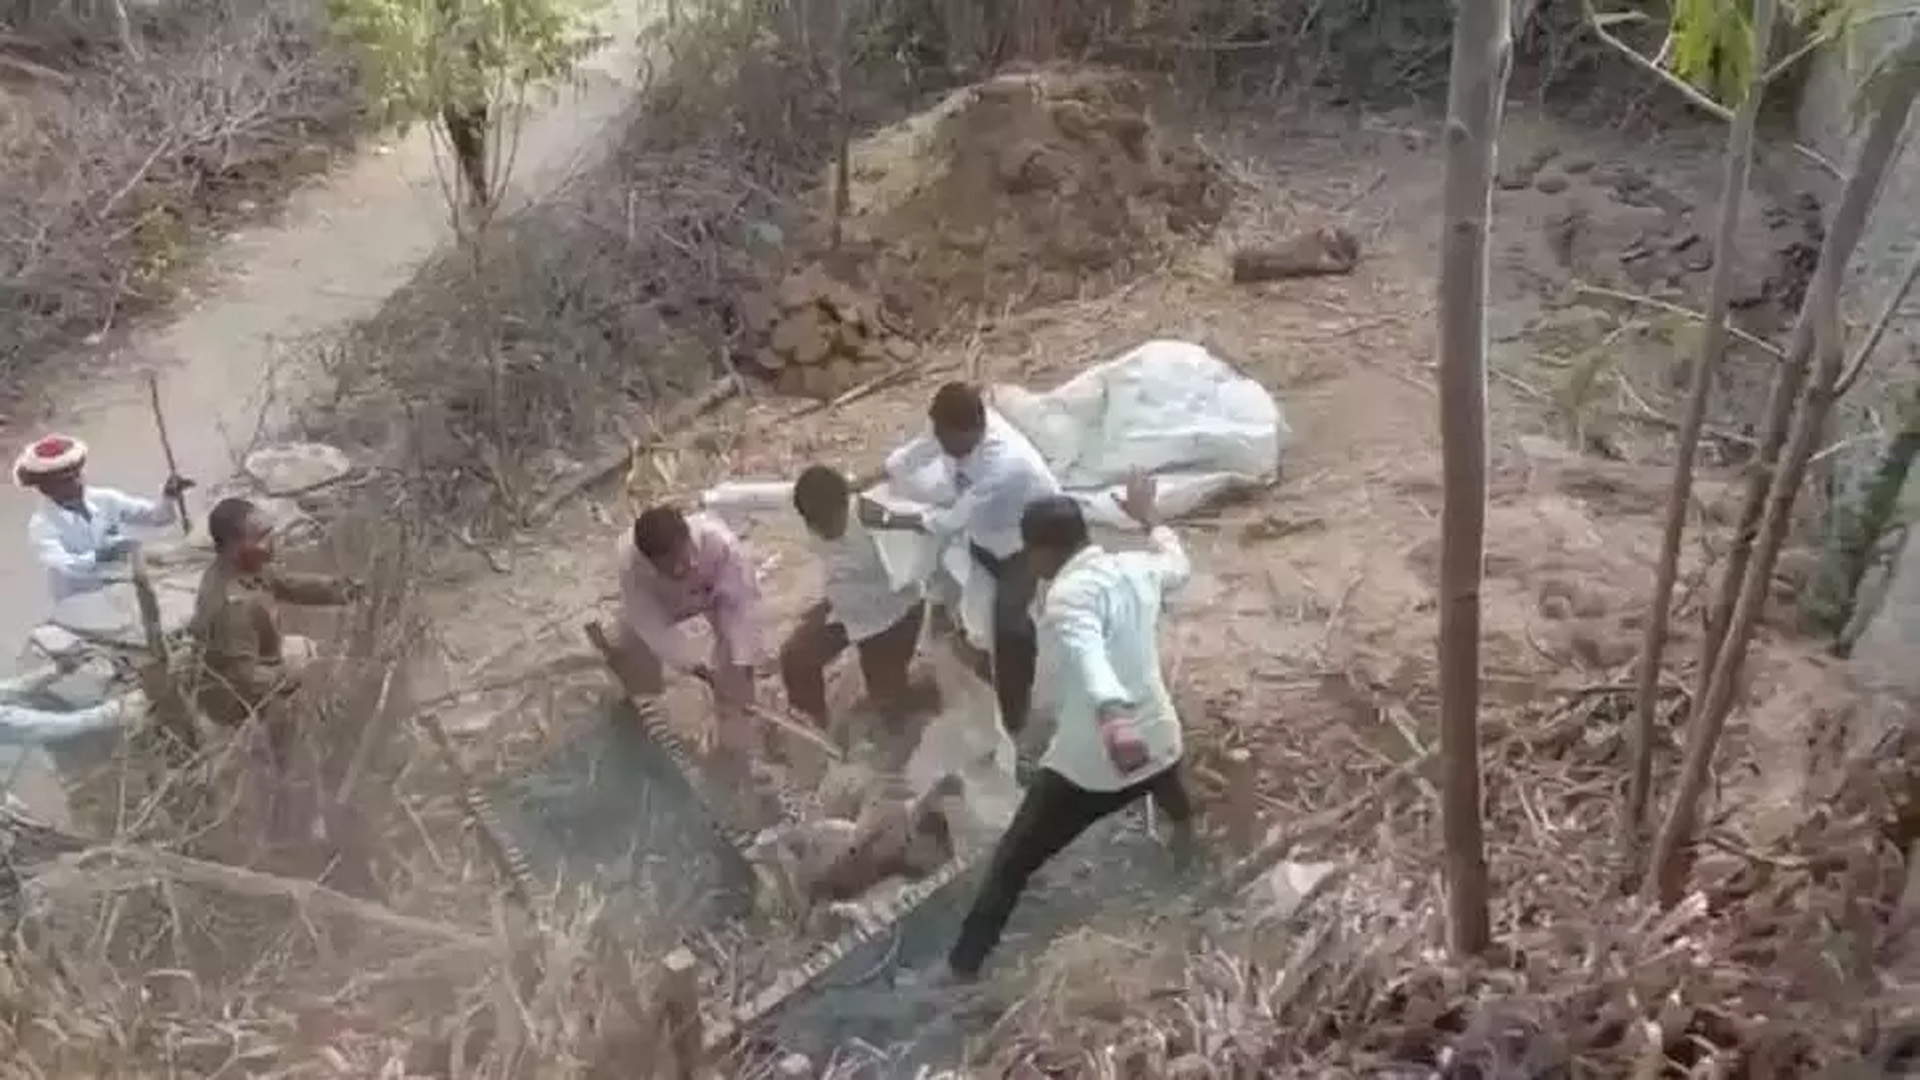 Leopard attacked and injured two brothers working on the farm